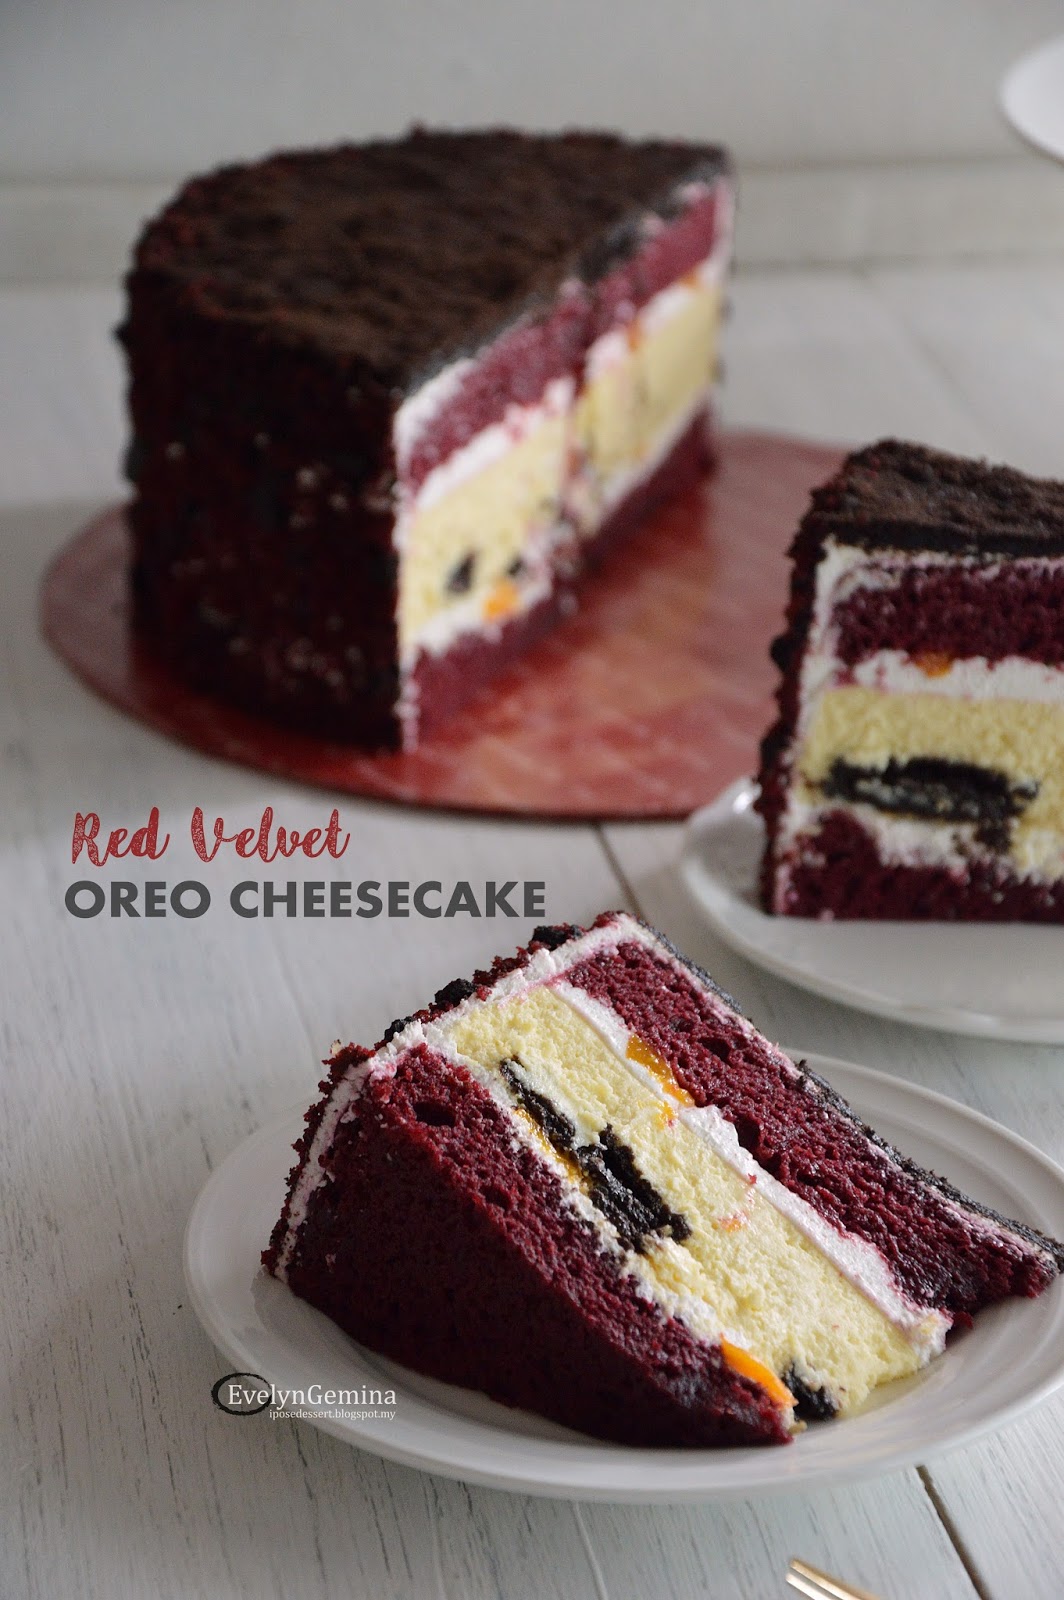 RED VELVET OREO CHEESECAKE special price for this month!!!